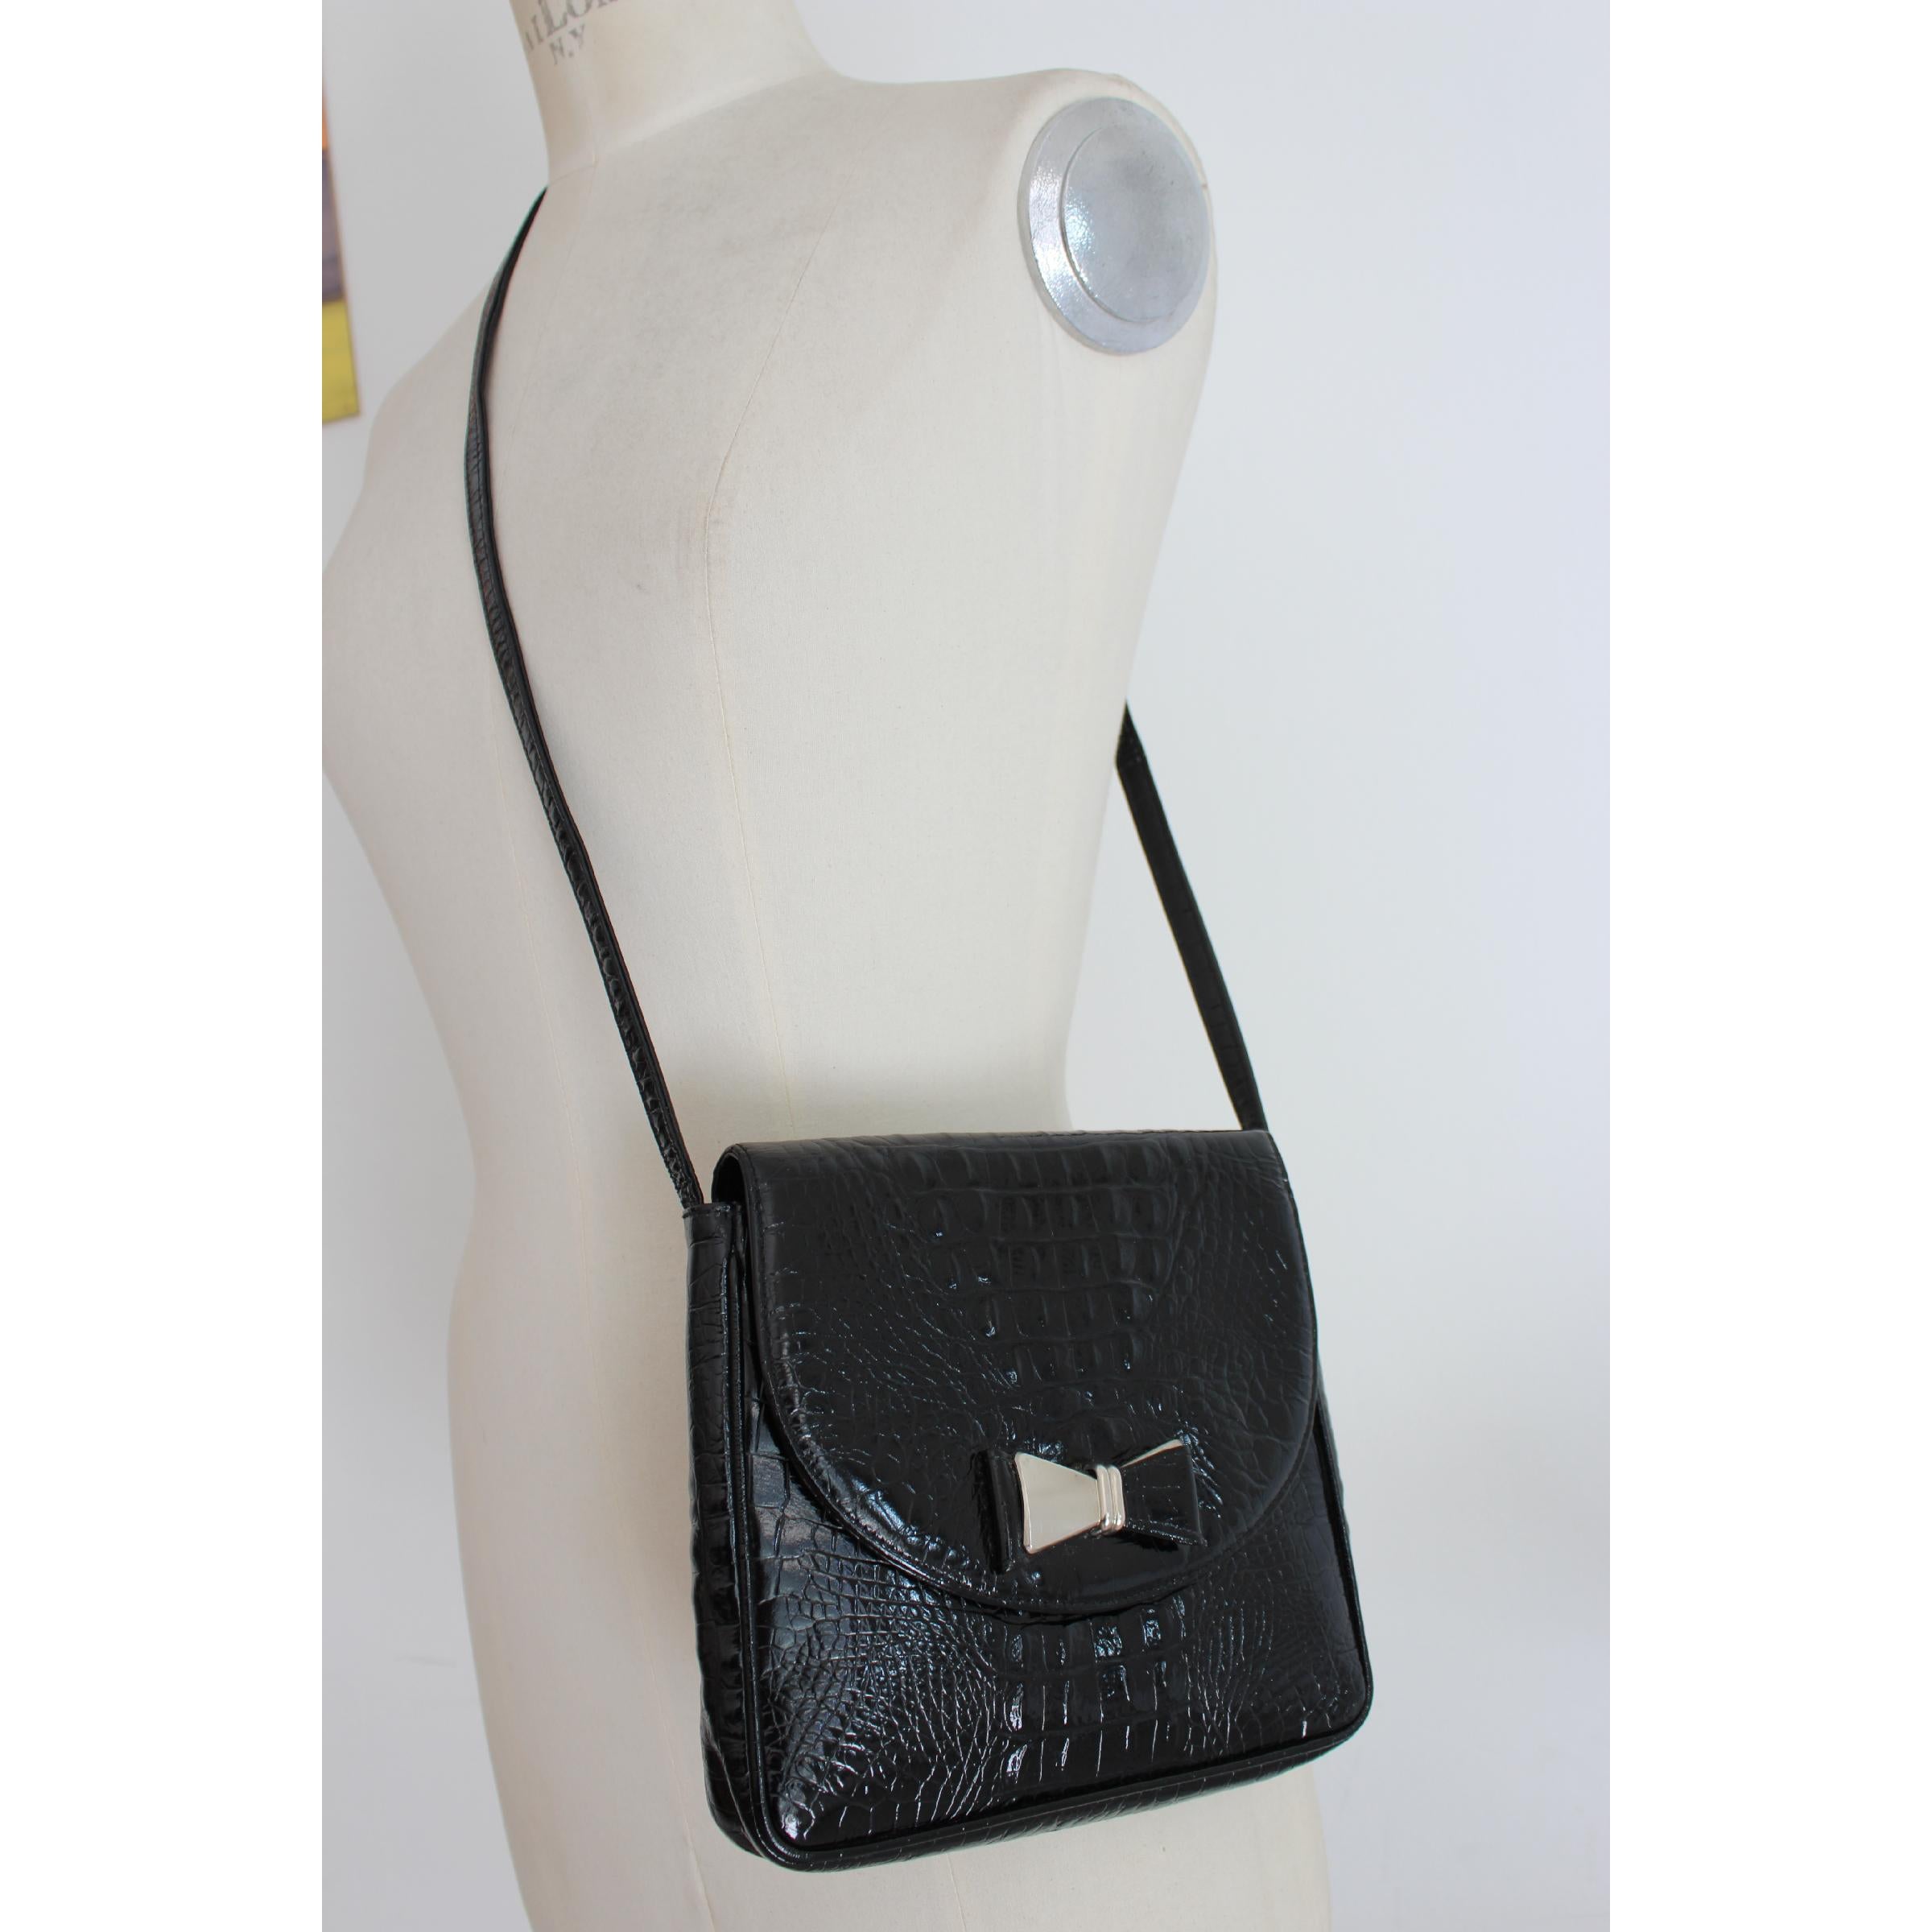 Gianni Versace Couture shoulder bag. Black color, 100% crocodile print leather. Closing with black and silver ribbon bow. Internally lined and logoed, zip pocket. 90s. Made in Italy. Excellent vintage conditions.

Width: 21 cm
Height: 20 cm
Depth: 4